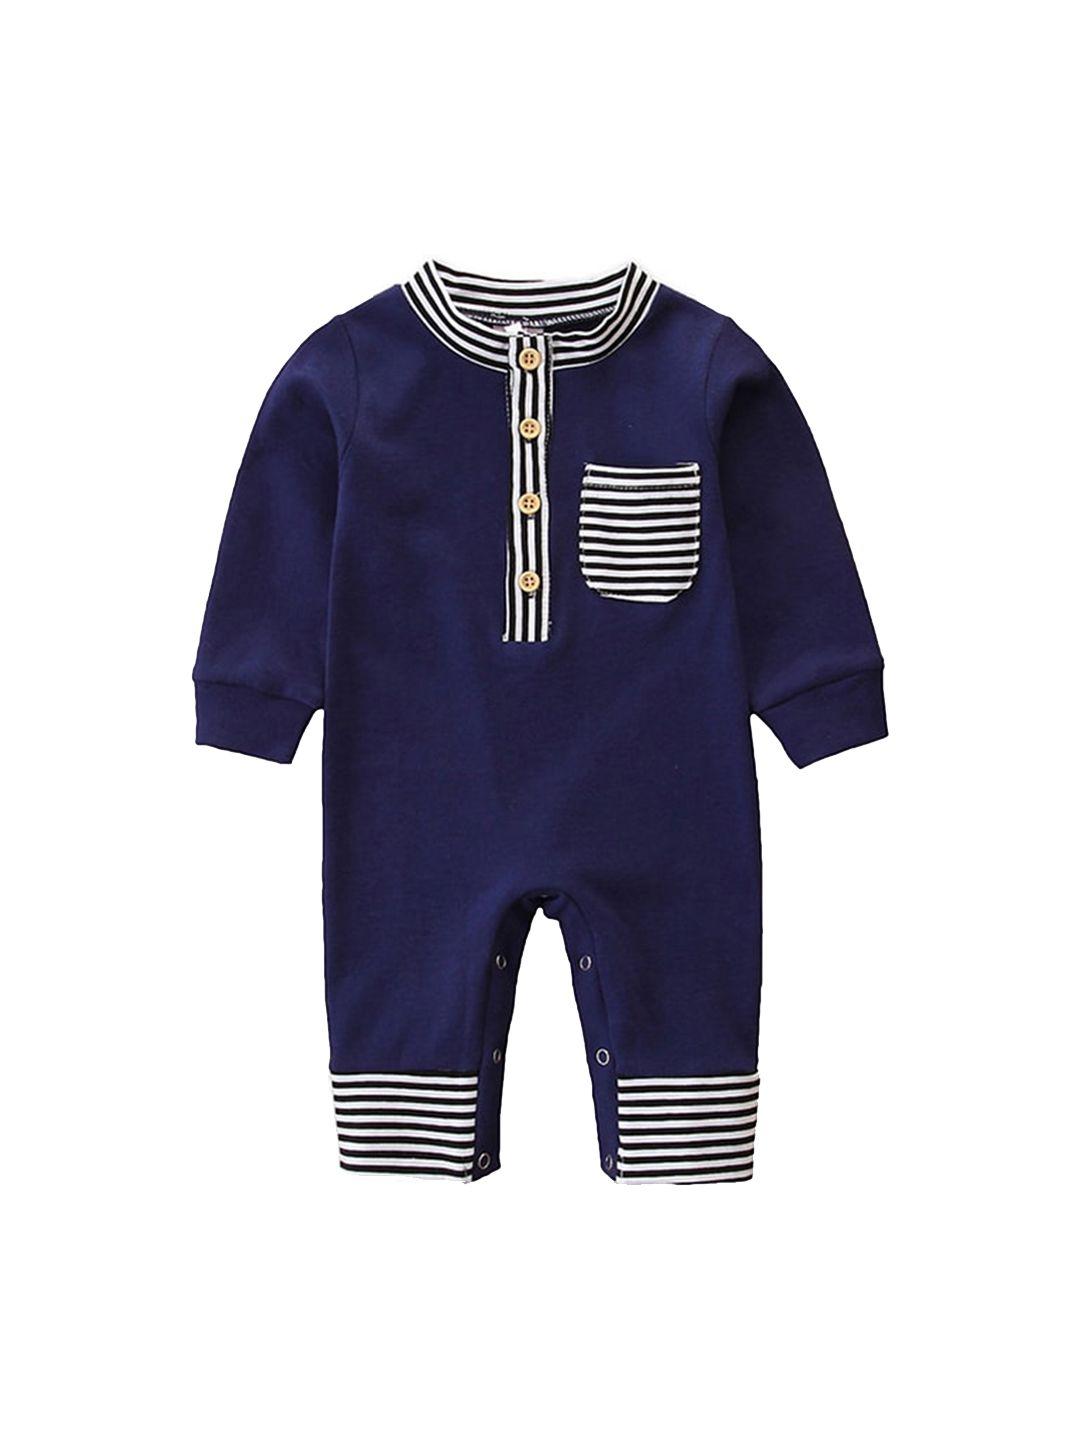 stylecast-infant-girls-navy-blue-cotton-rompers